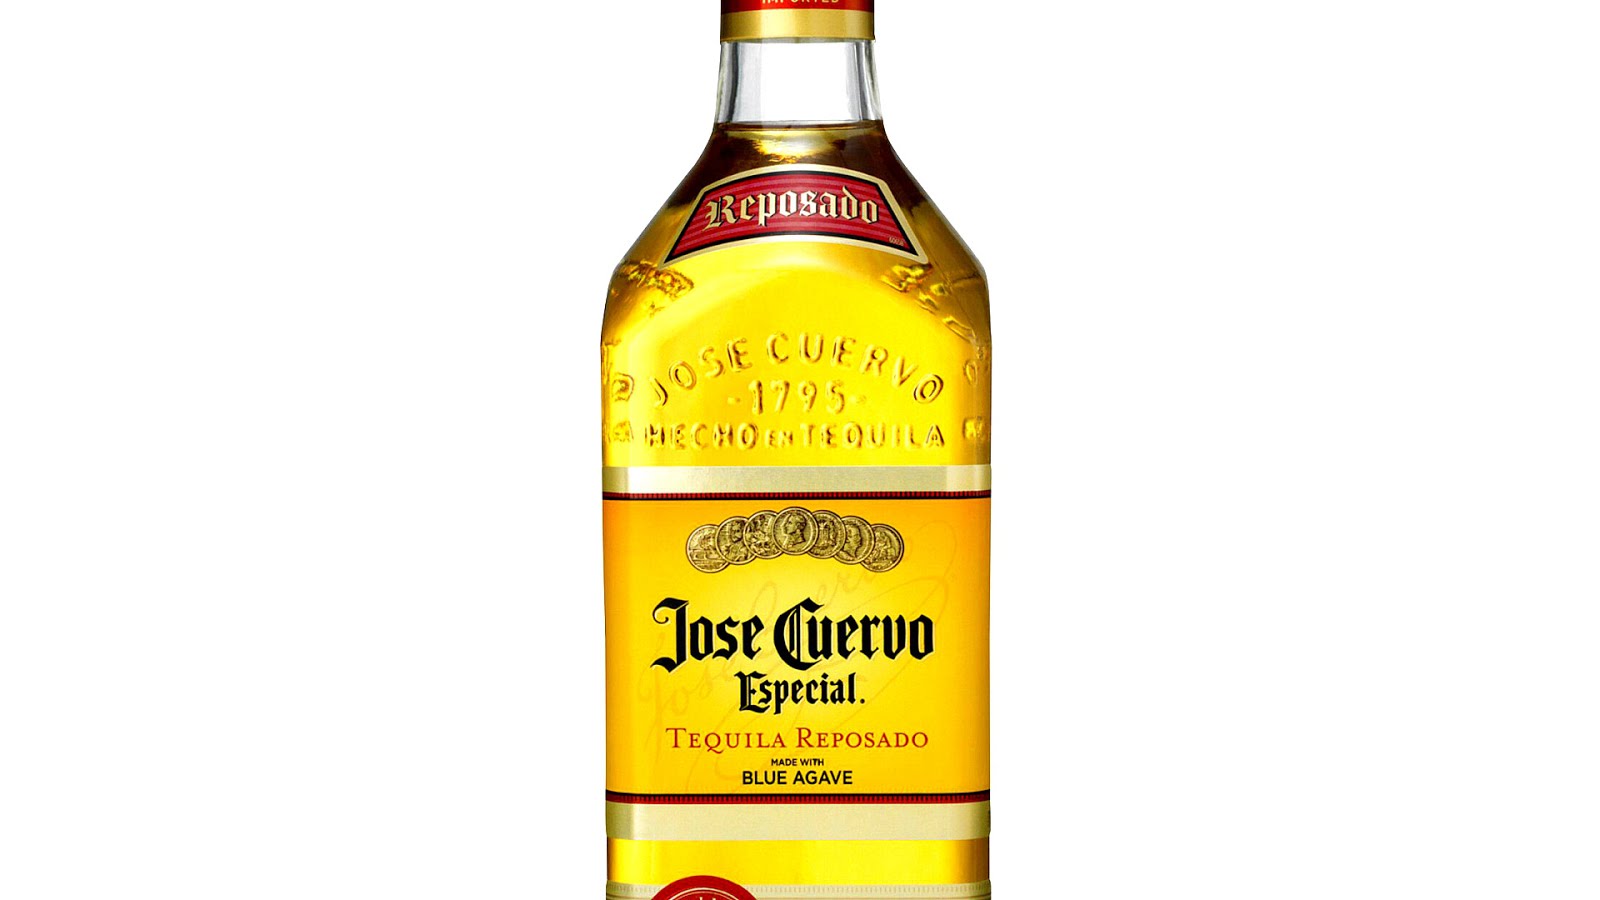 jose-cuervo-gold-tequila-price-gold-choices